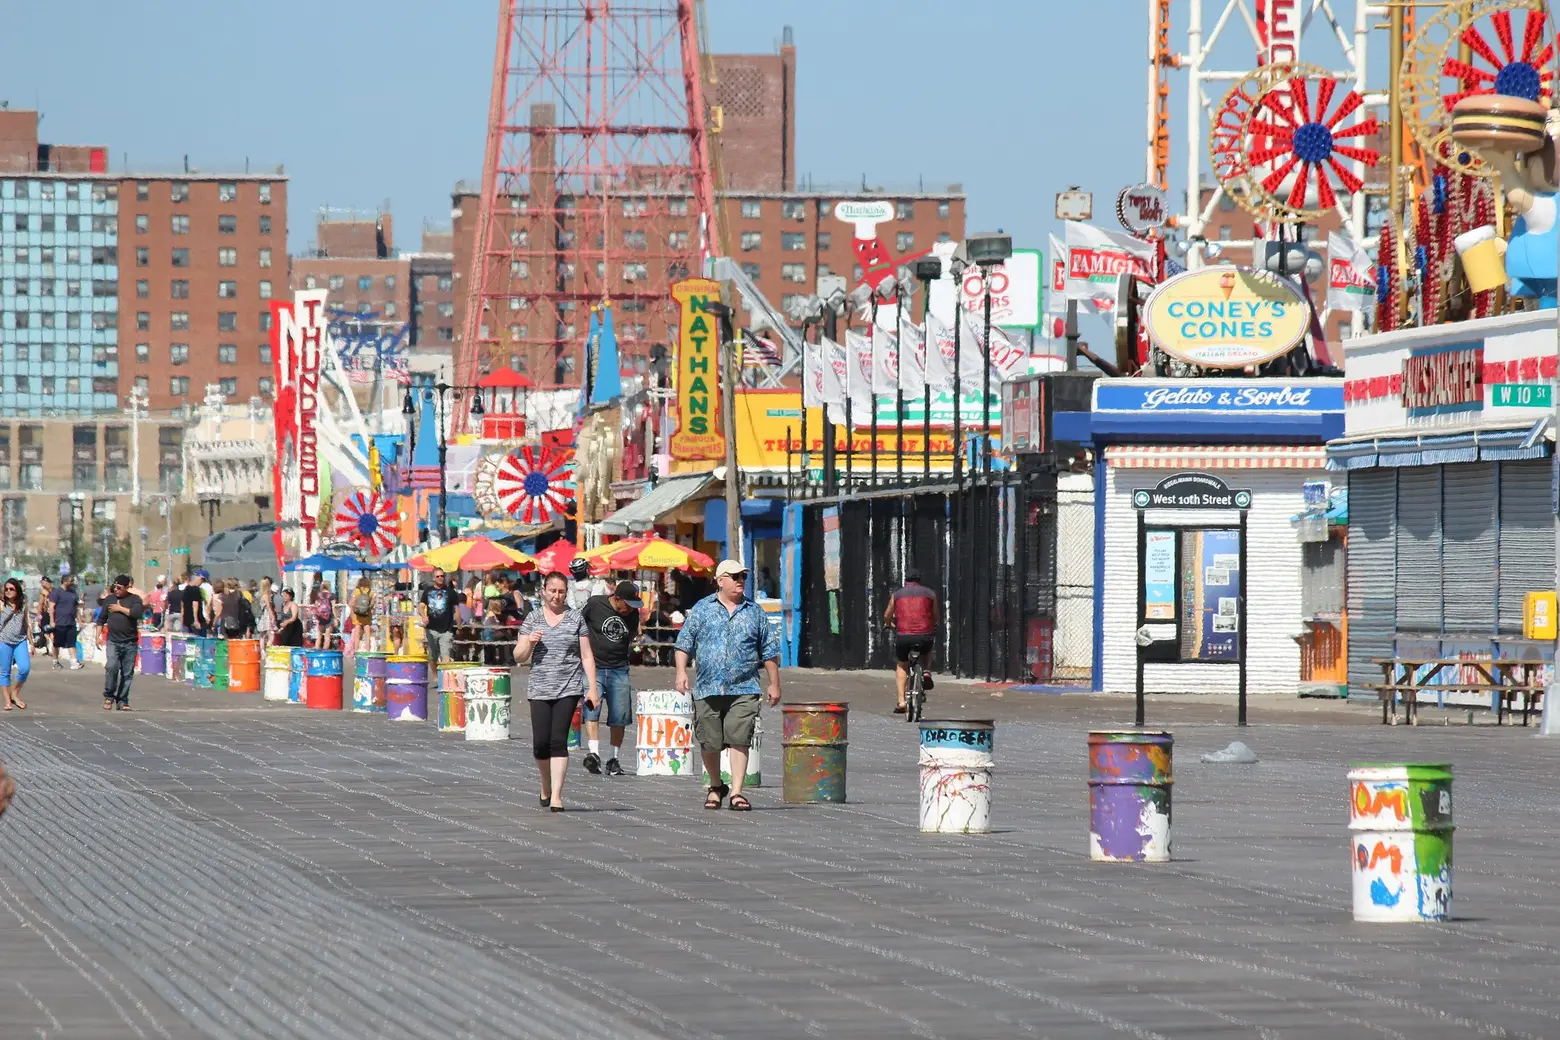 NYC plans to replace Coney Island boardwalk with sustainable plastic decking